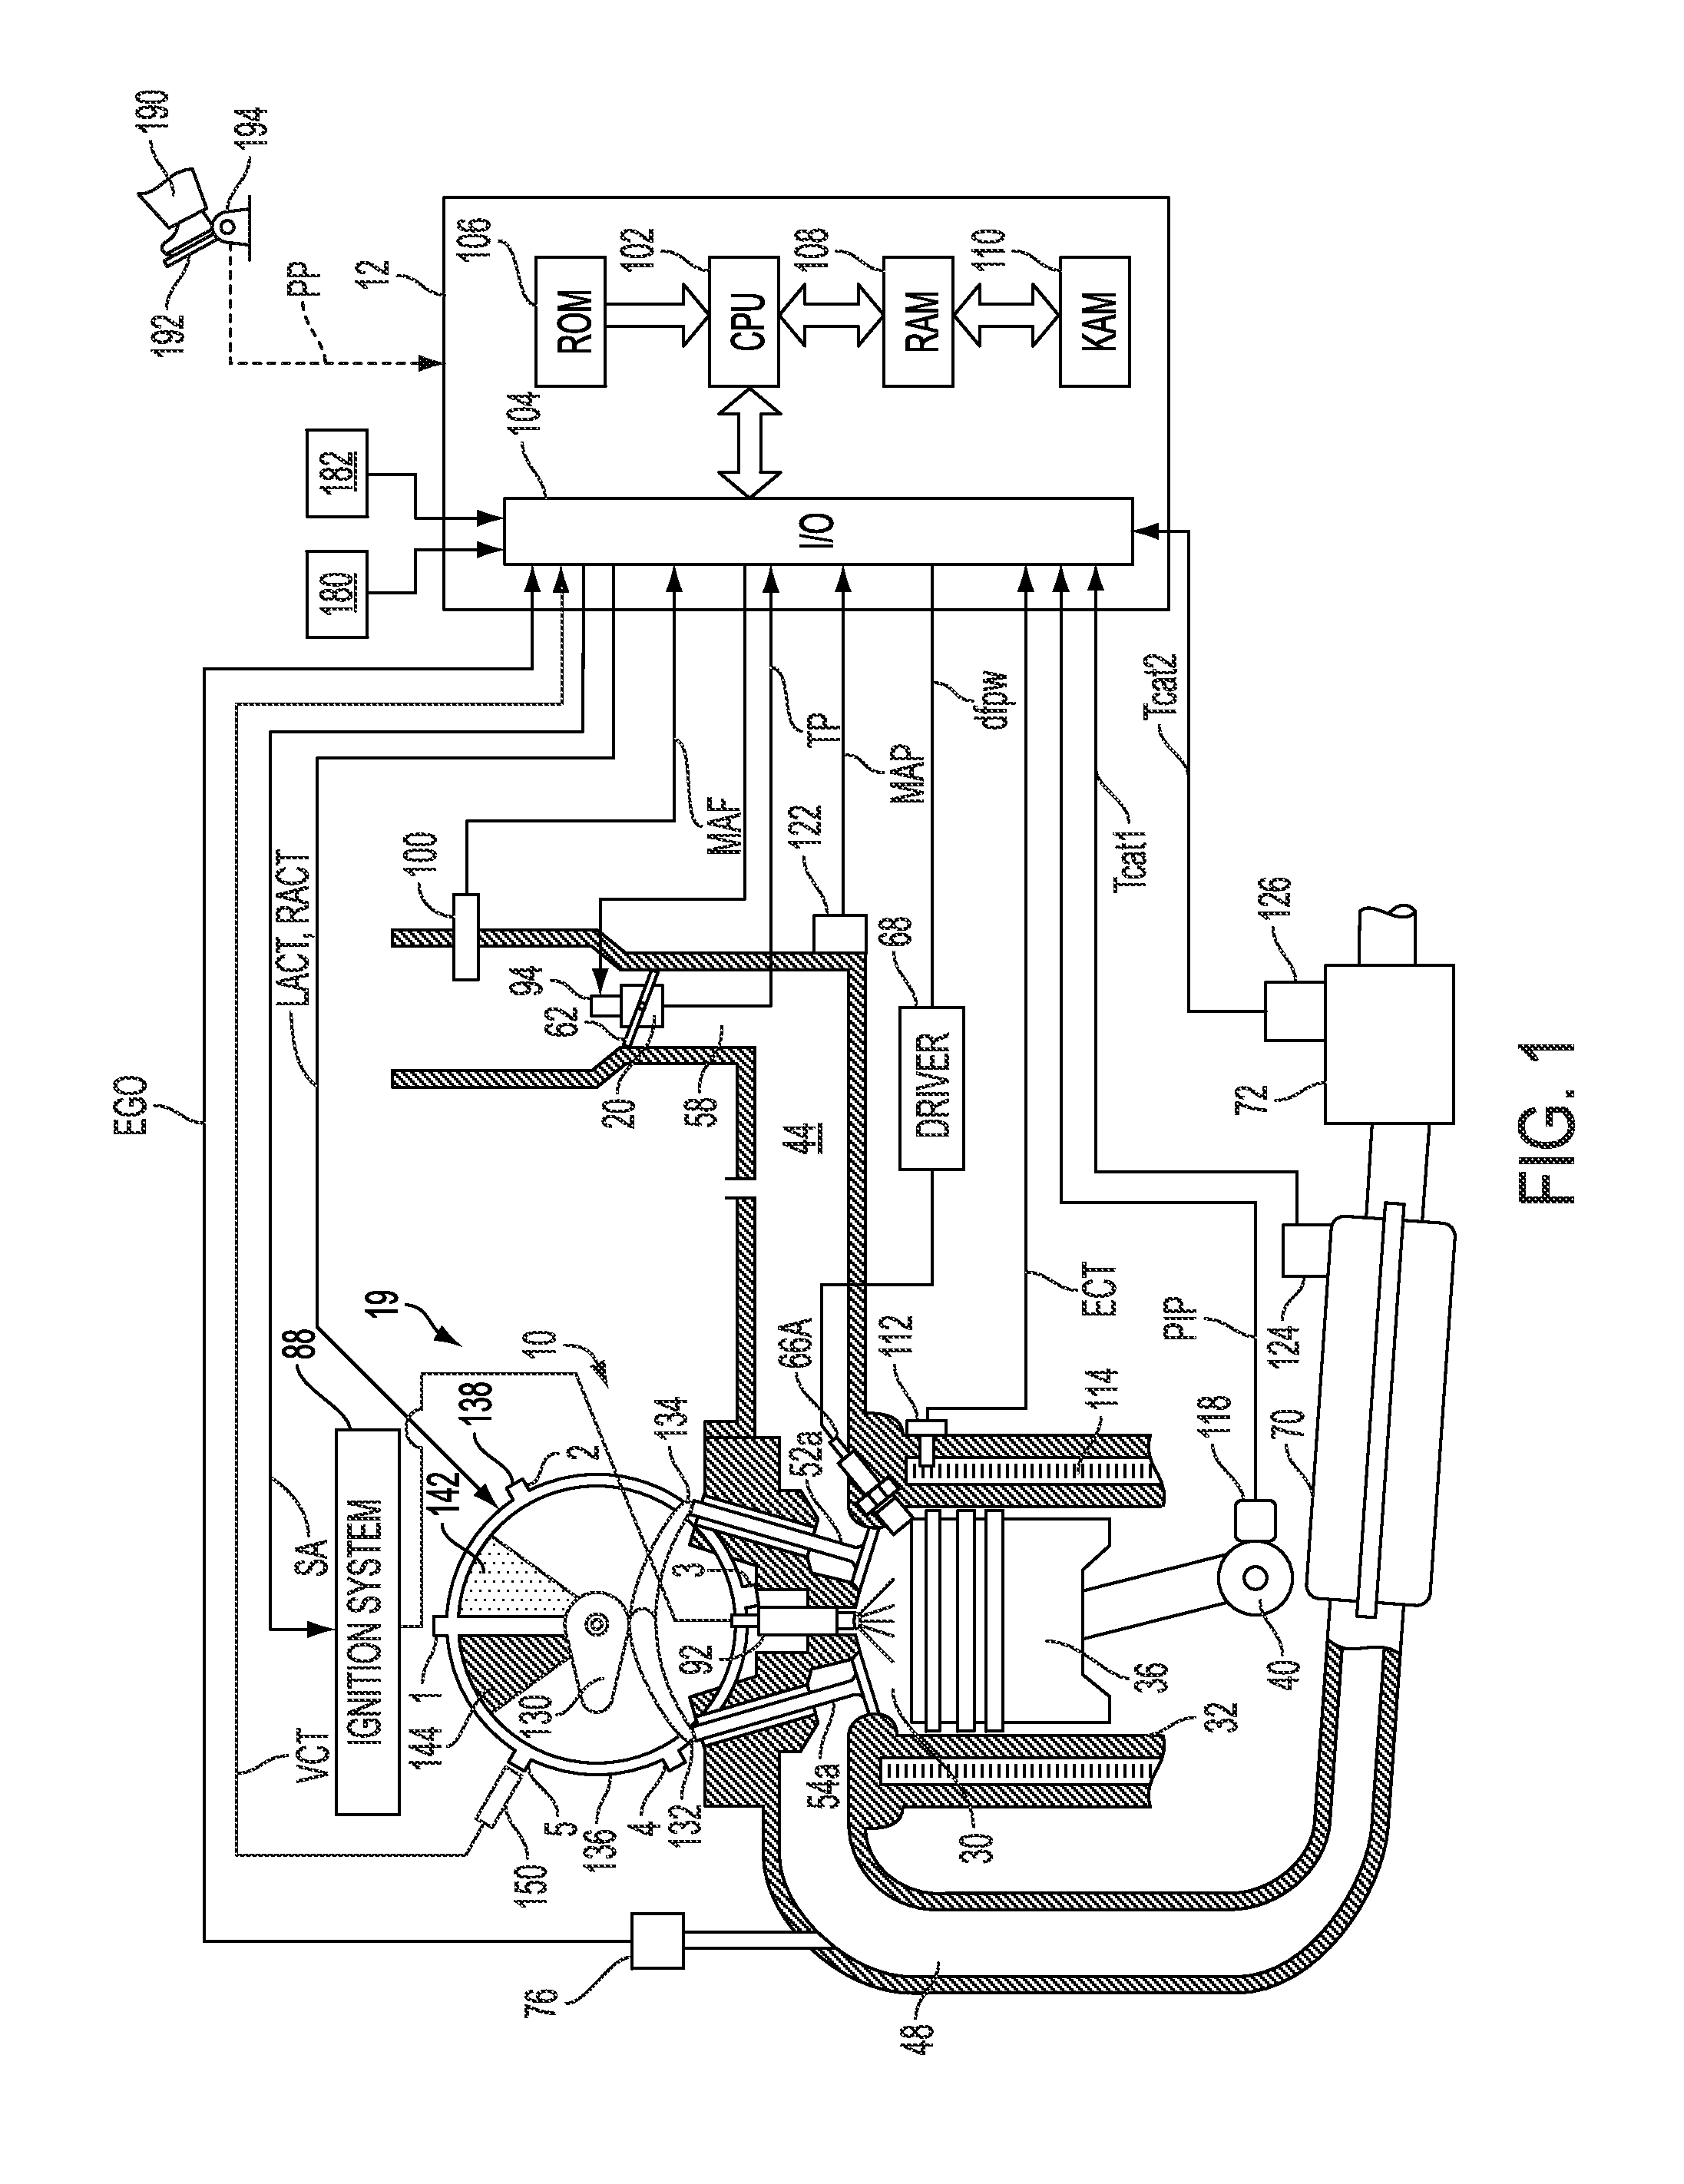 Engine with hydraulic variable valve timing